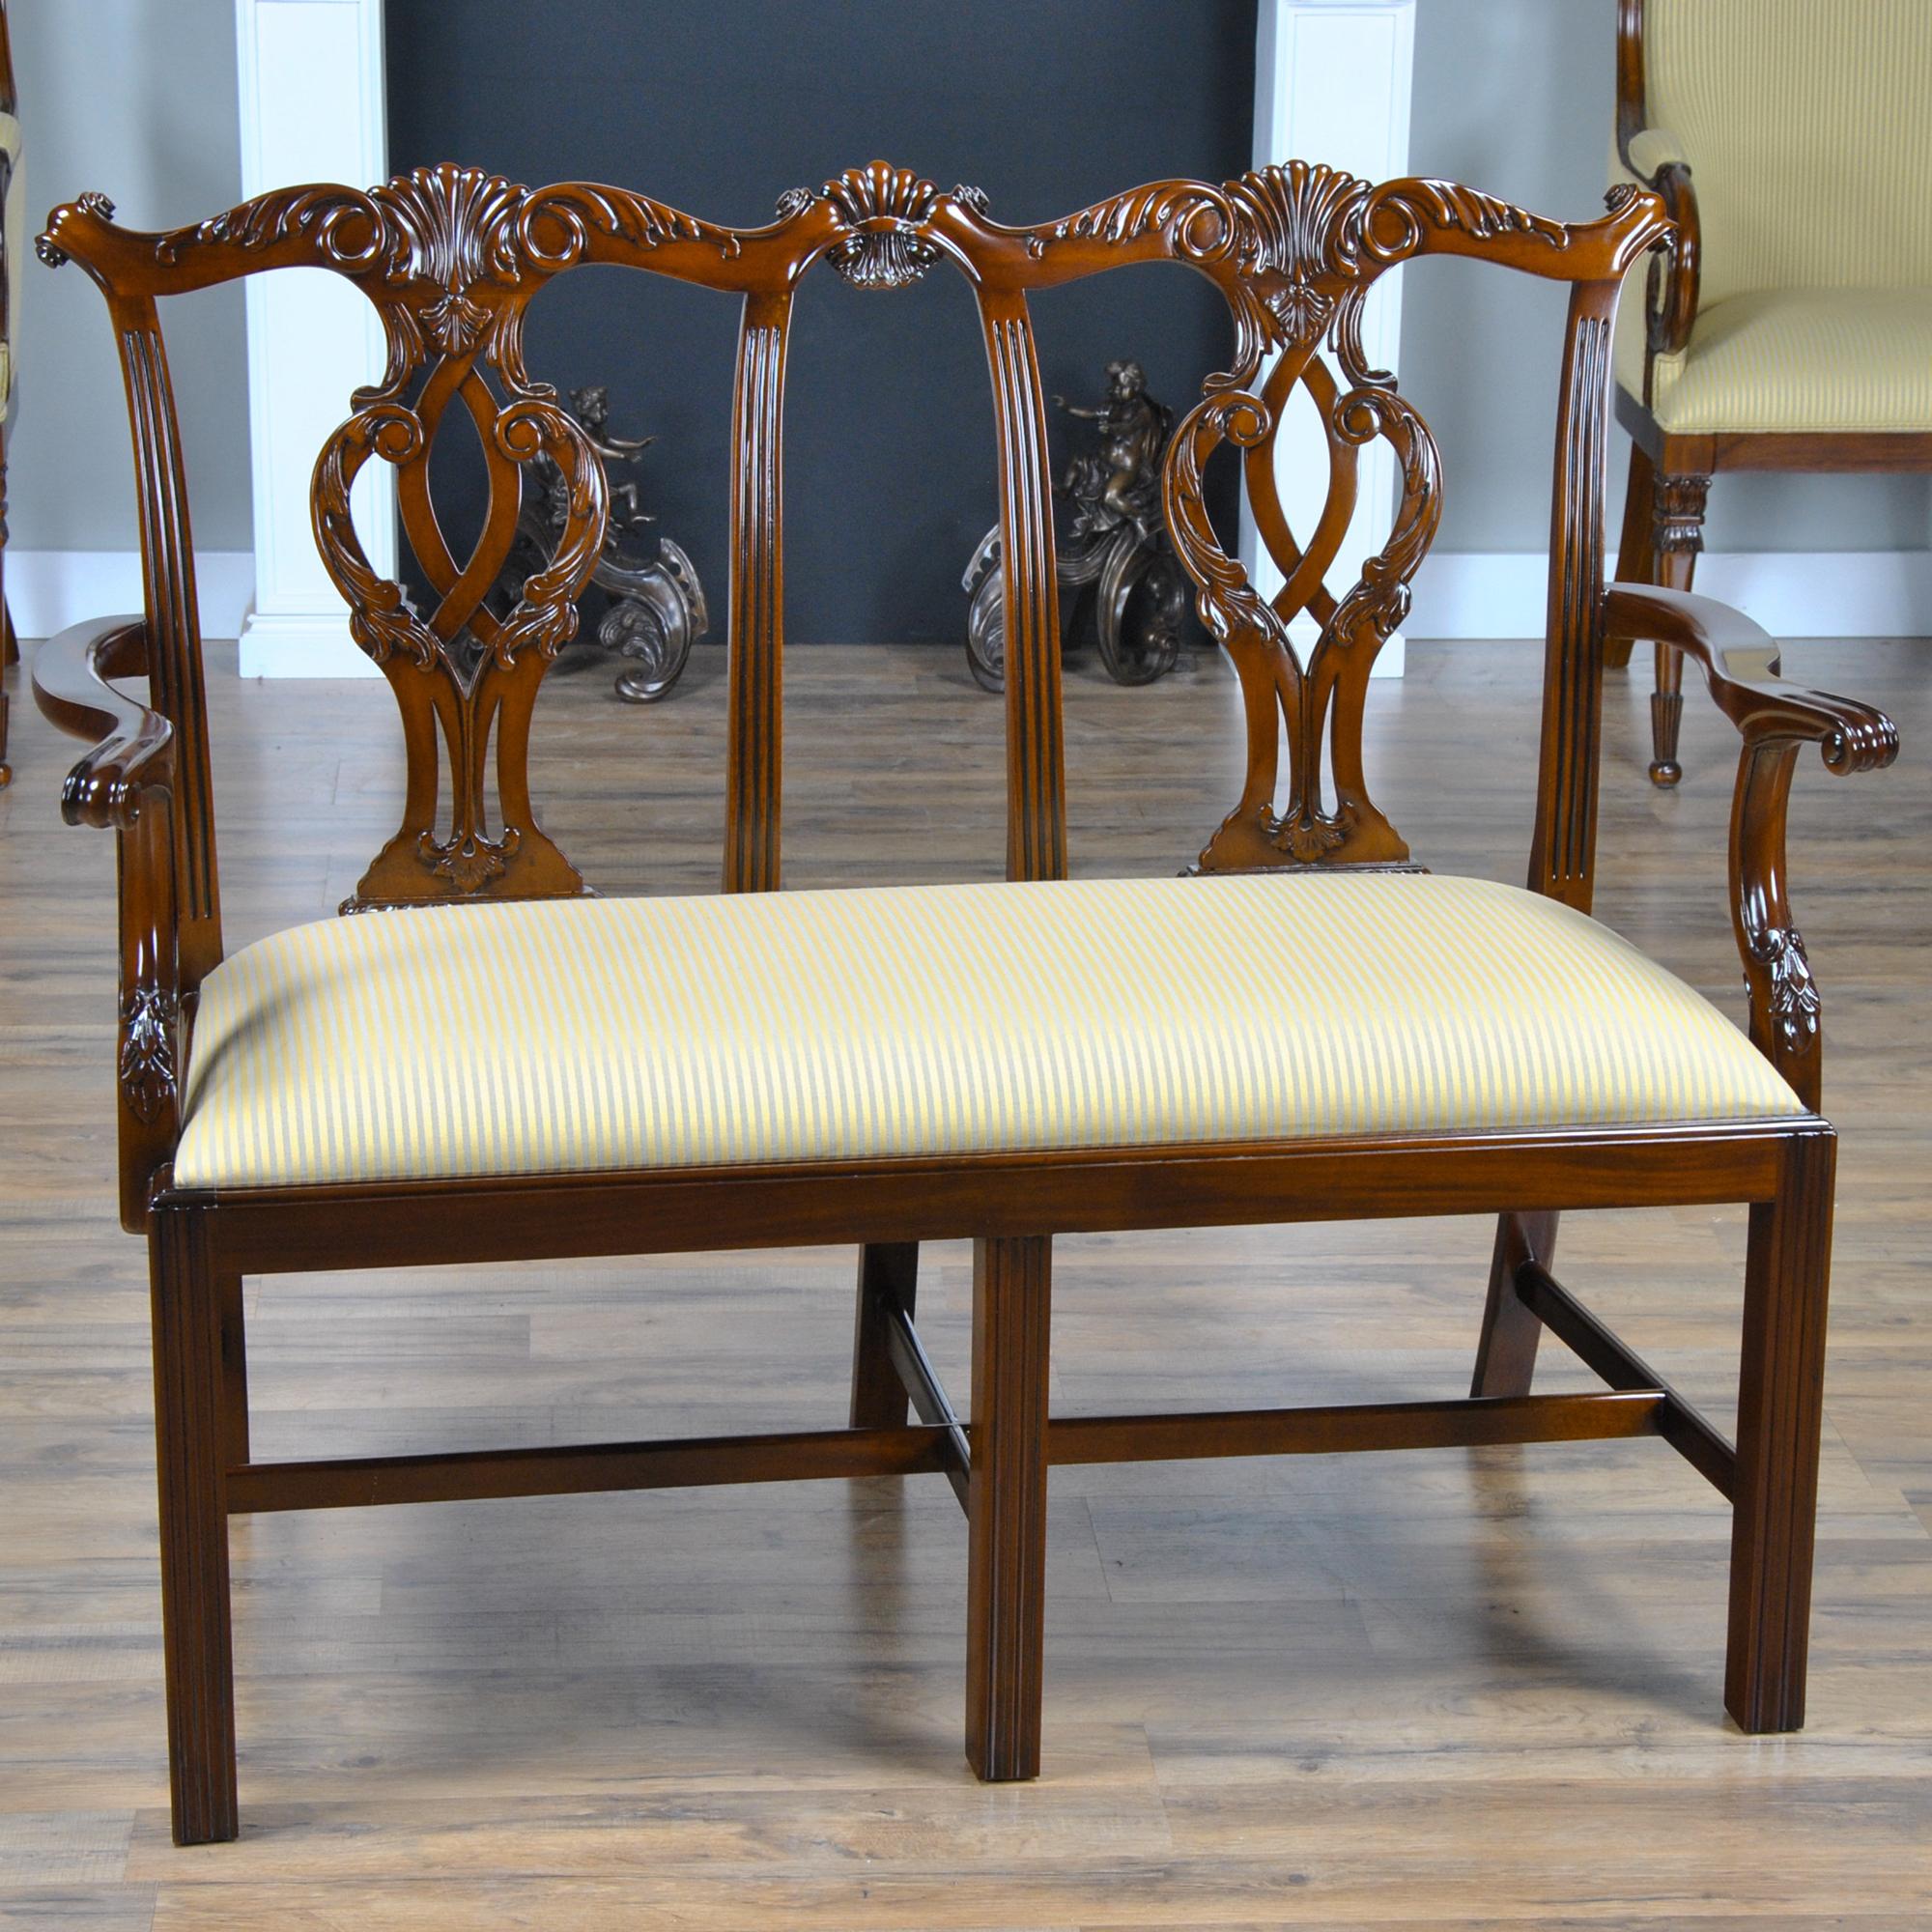 The Cambridge Two Seat Chair is crafted from solid, kiln dried, plantation grown mahogany, hand carved in the Chippendale Style. This classic styled love seat features a serpentine crest rail and a carved and pierced back splat. Scrolled arms at a